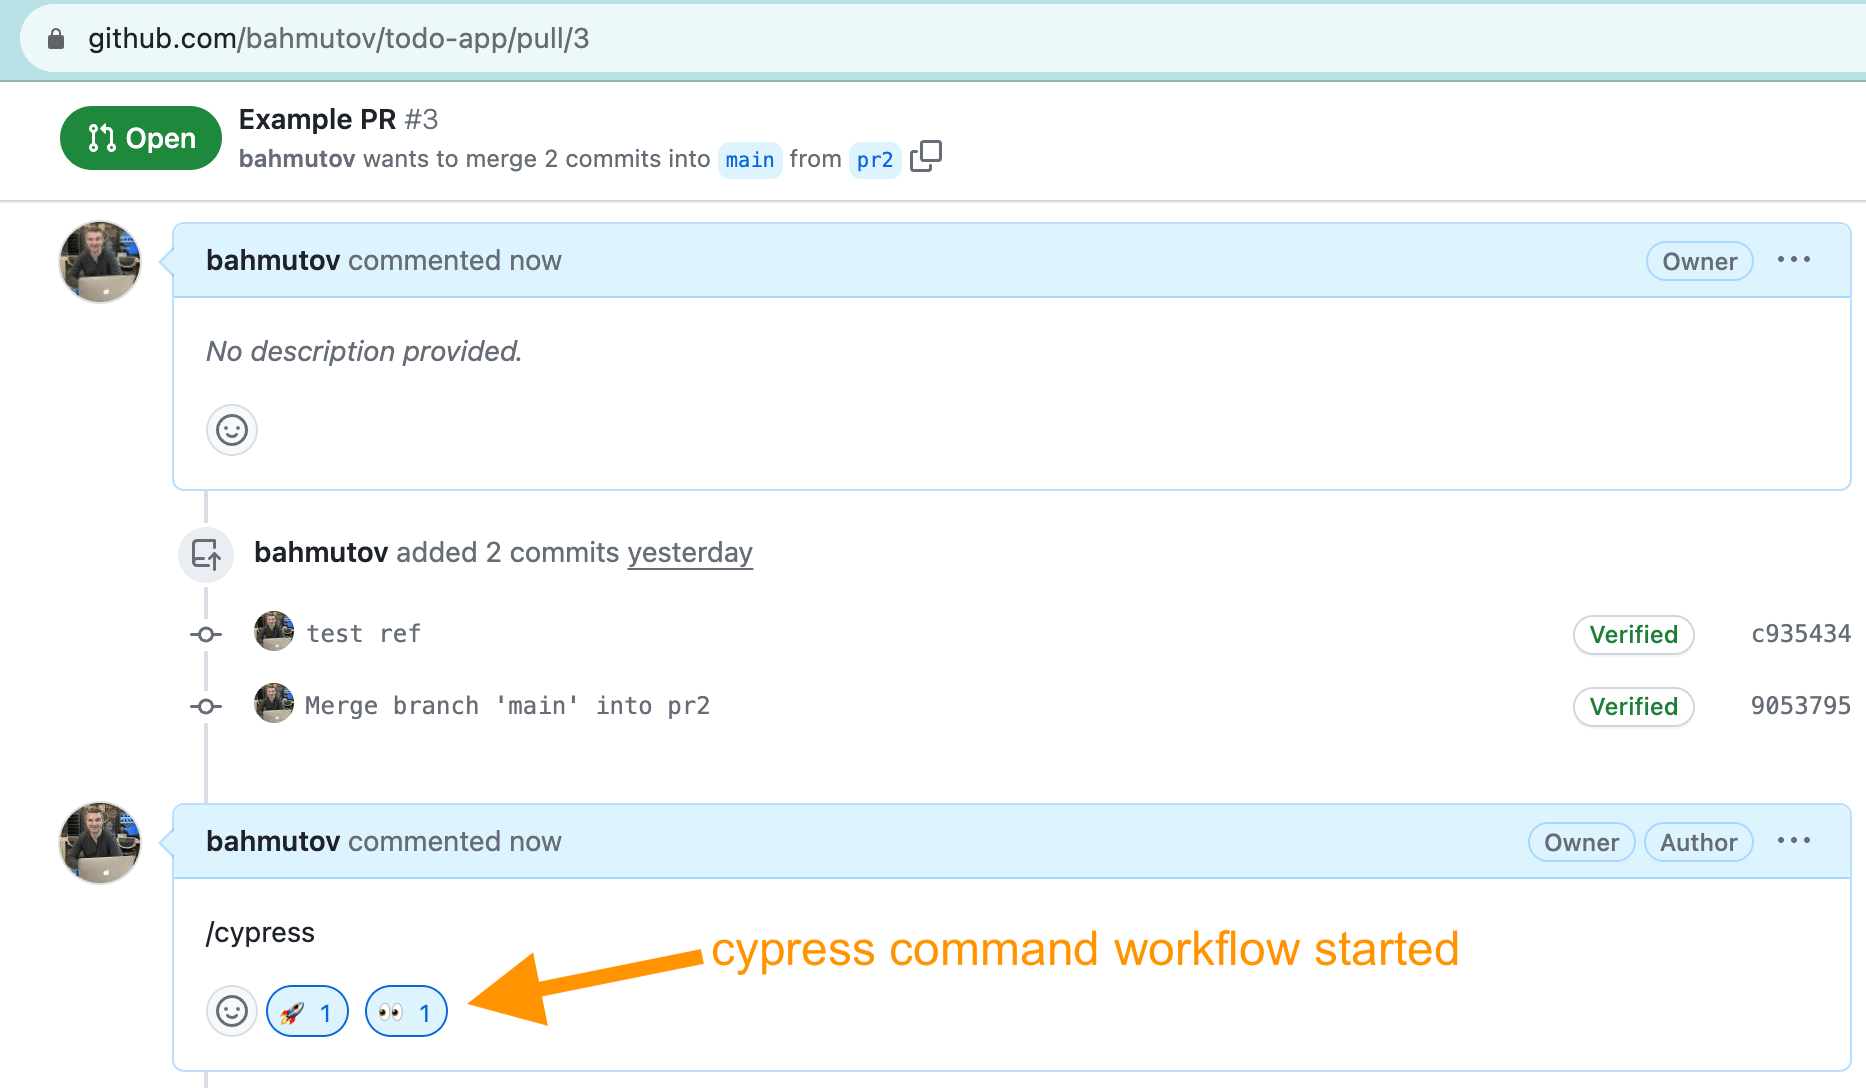 This reactions mean the command workflow was found and started